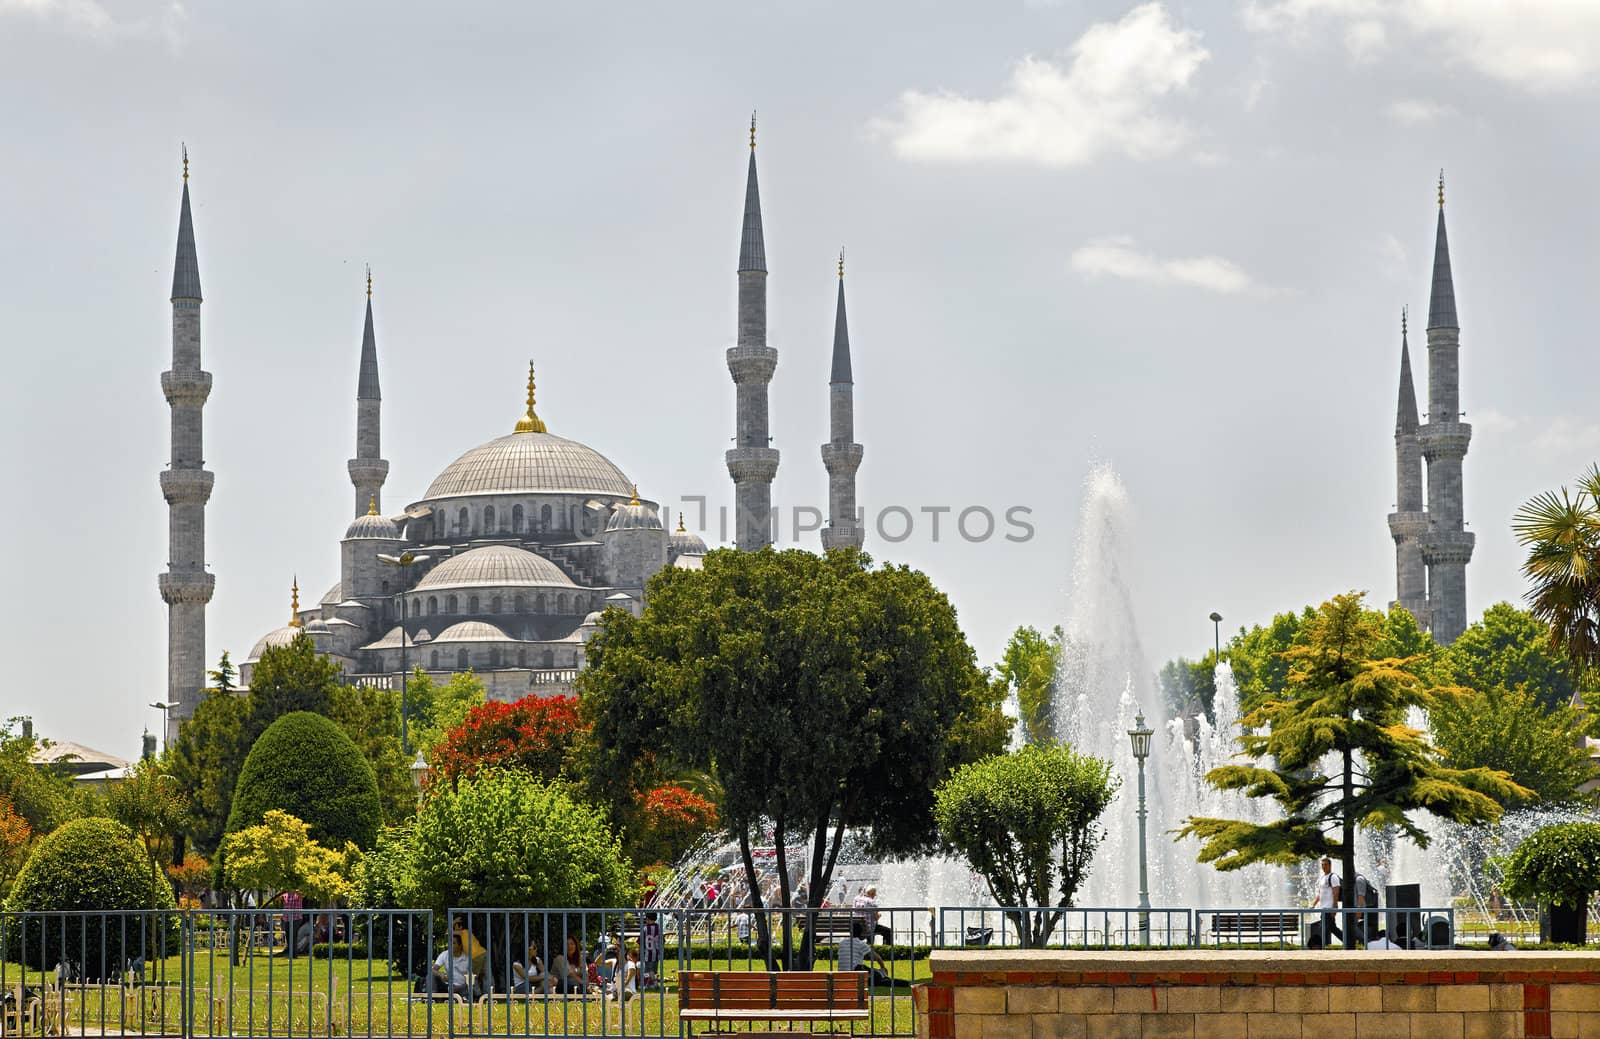 Landscape of the the Blue Mosque Istanbul, its fountains, gardens and general public picnicing in the grounds